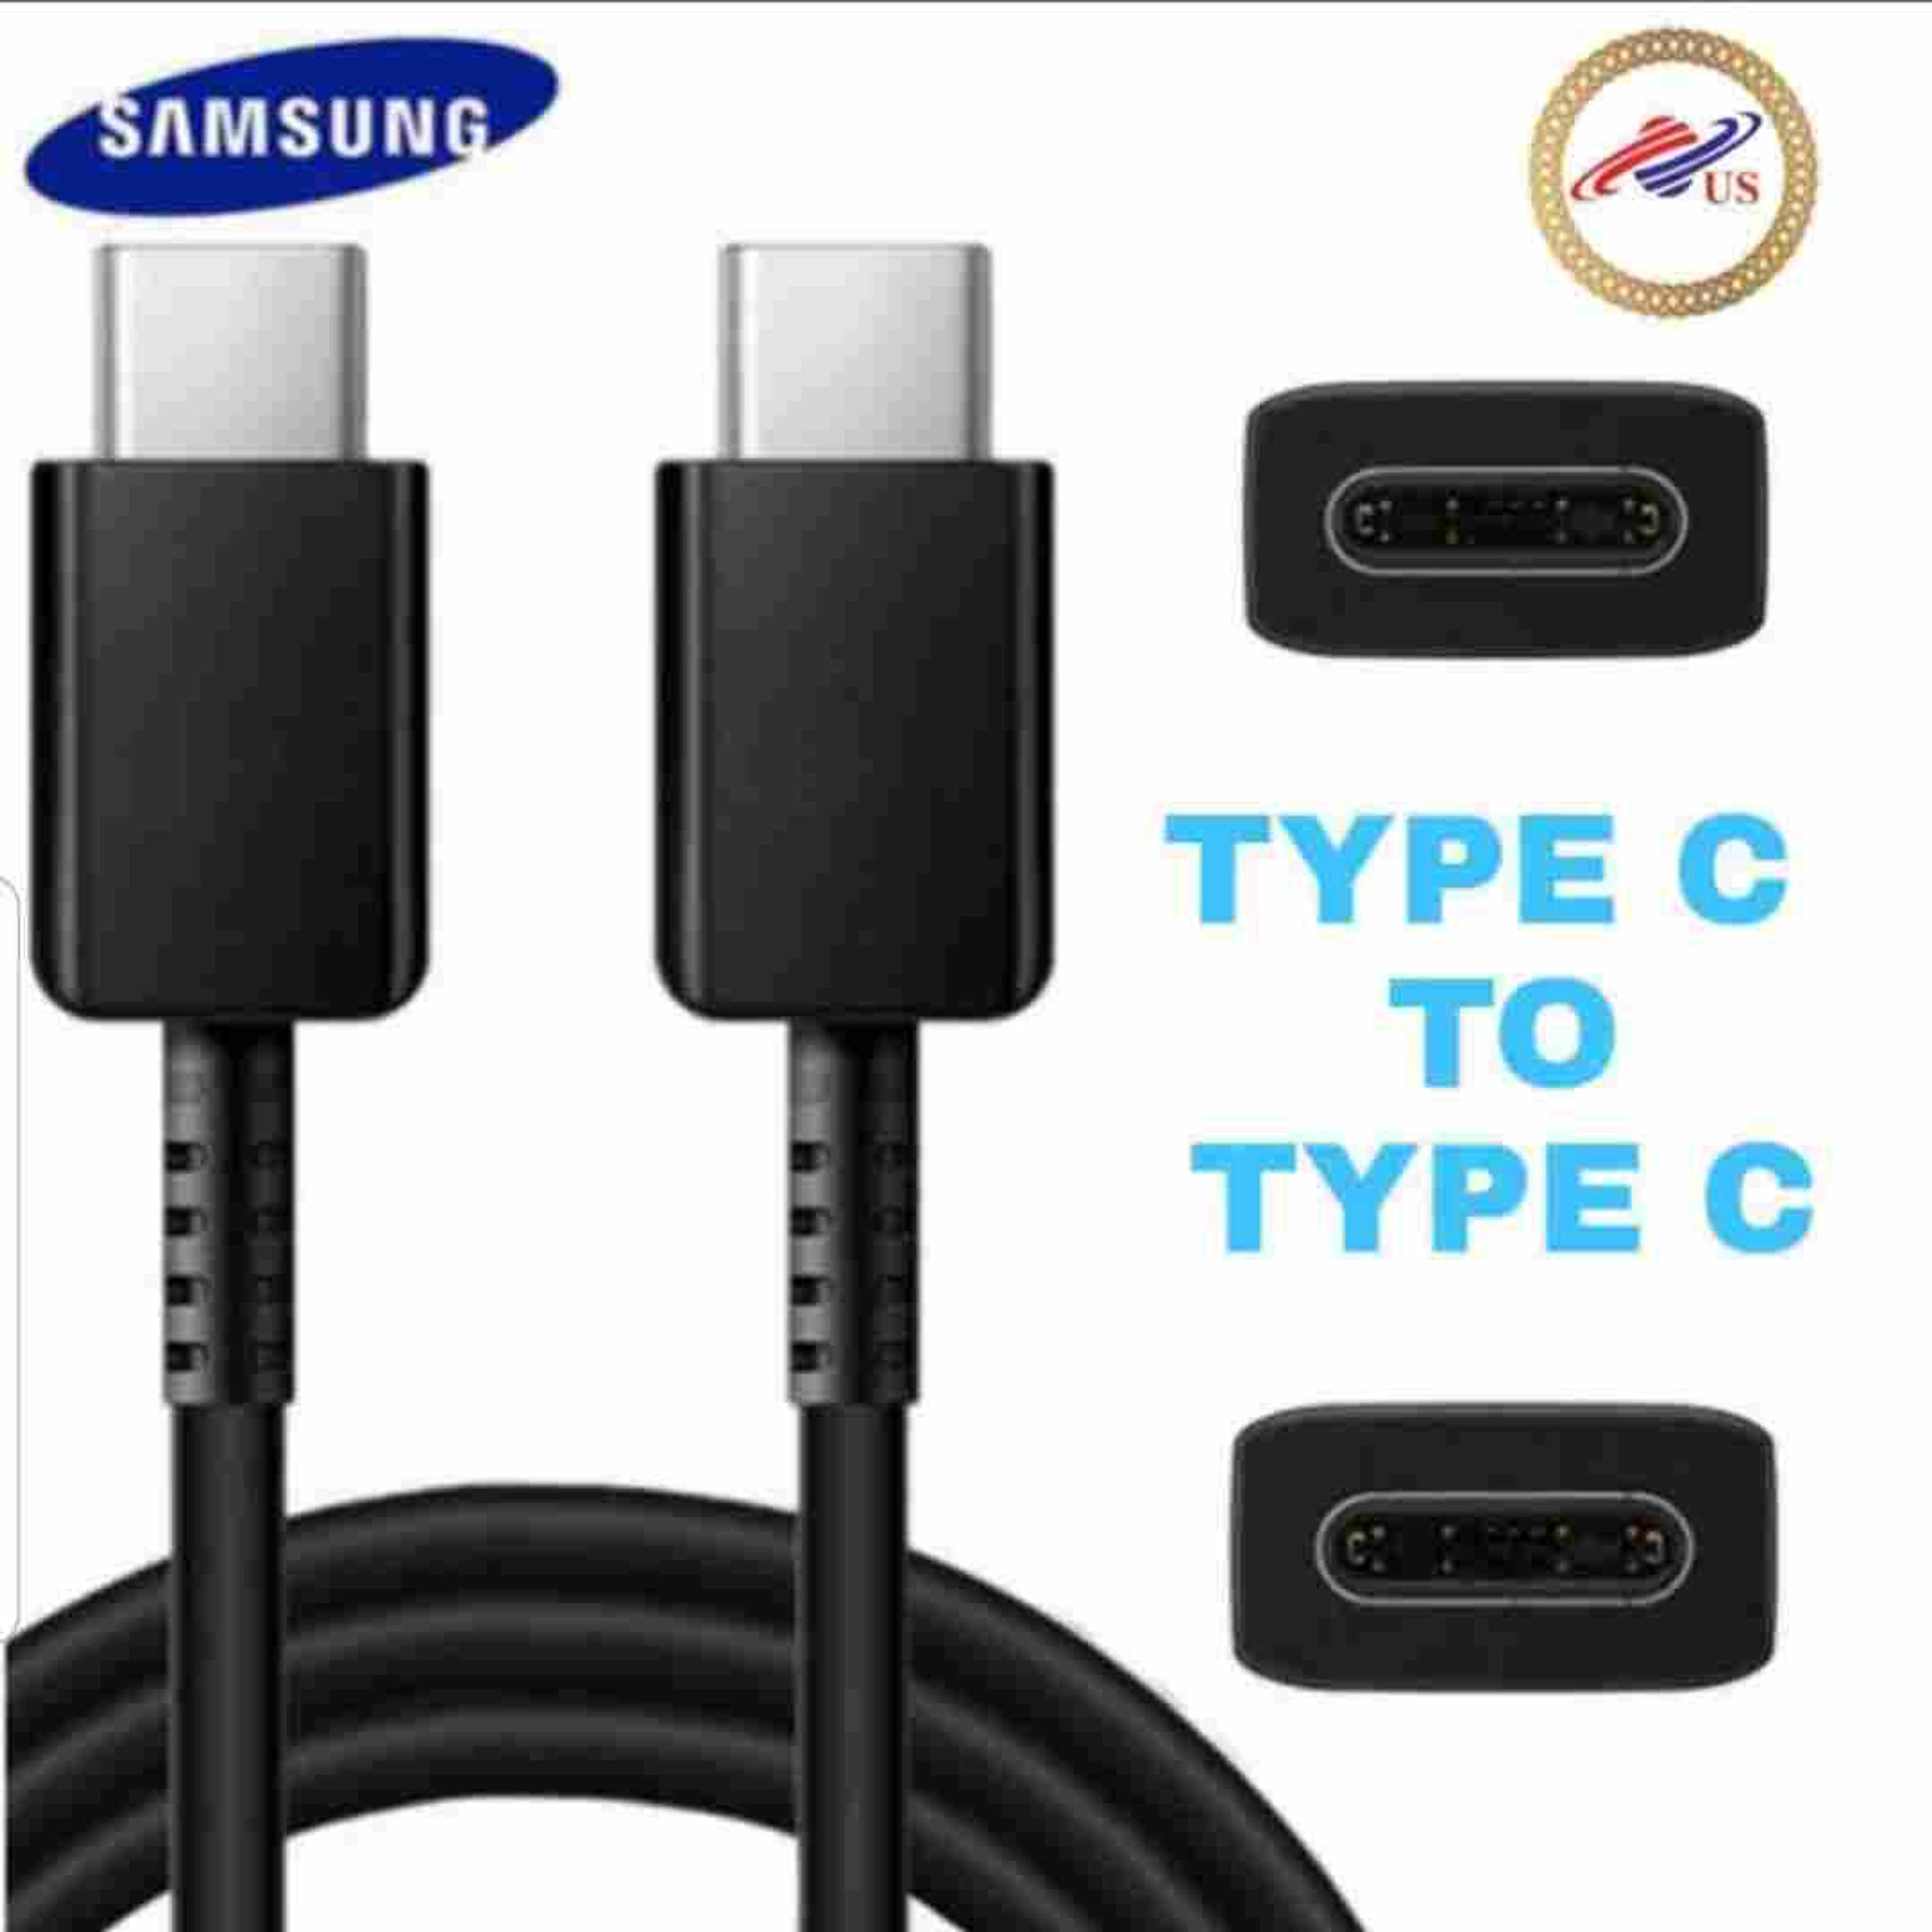 samsung type c to type c cable